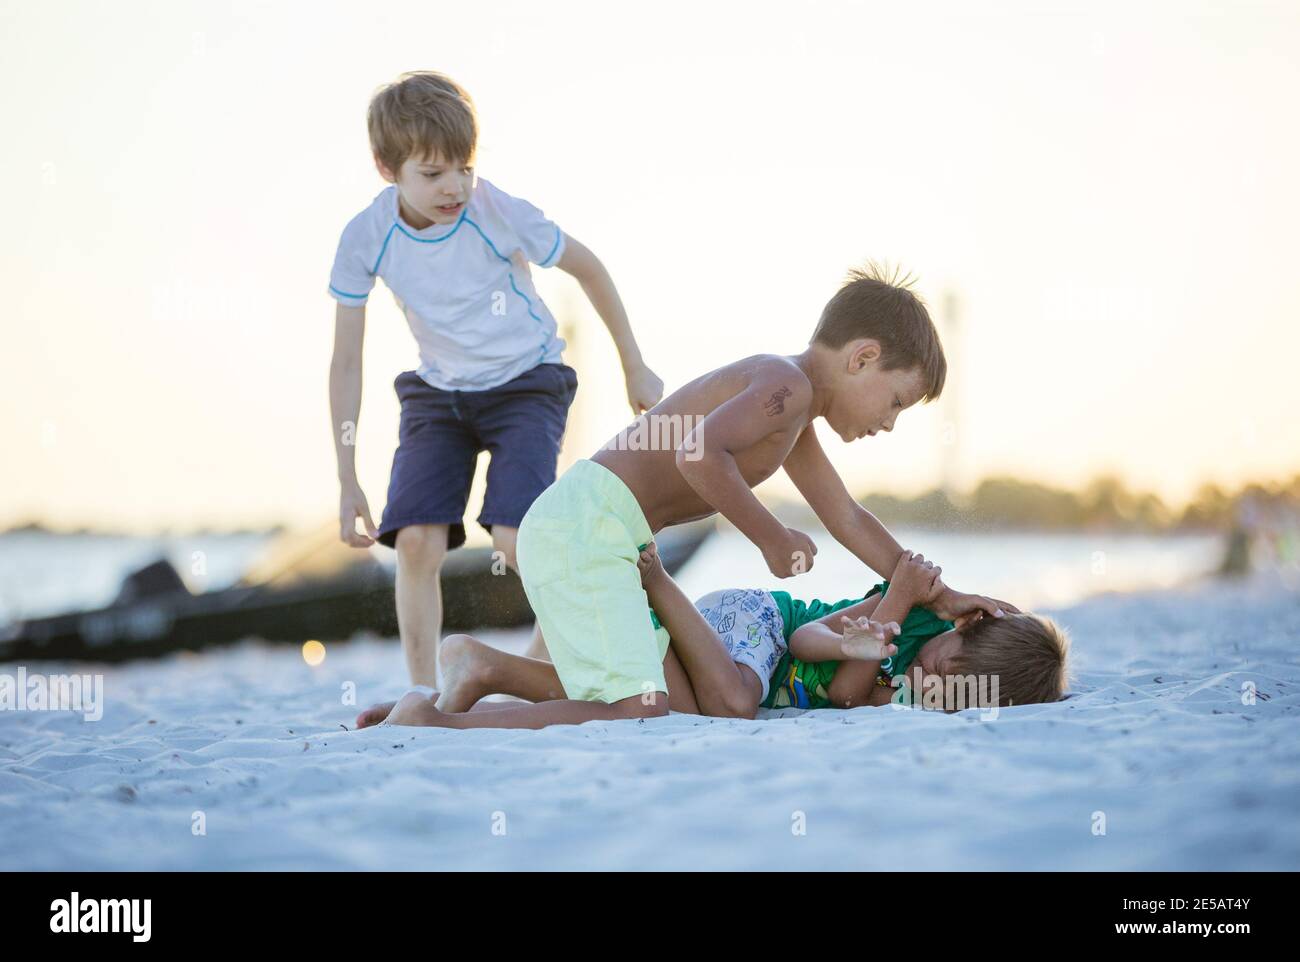 Young boys fighting on beach, older boy going to hit younger one. Siblings rivalry. Stock Photo